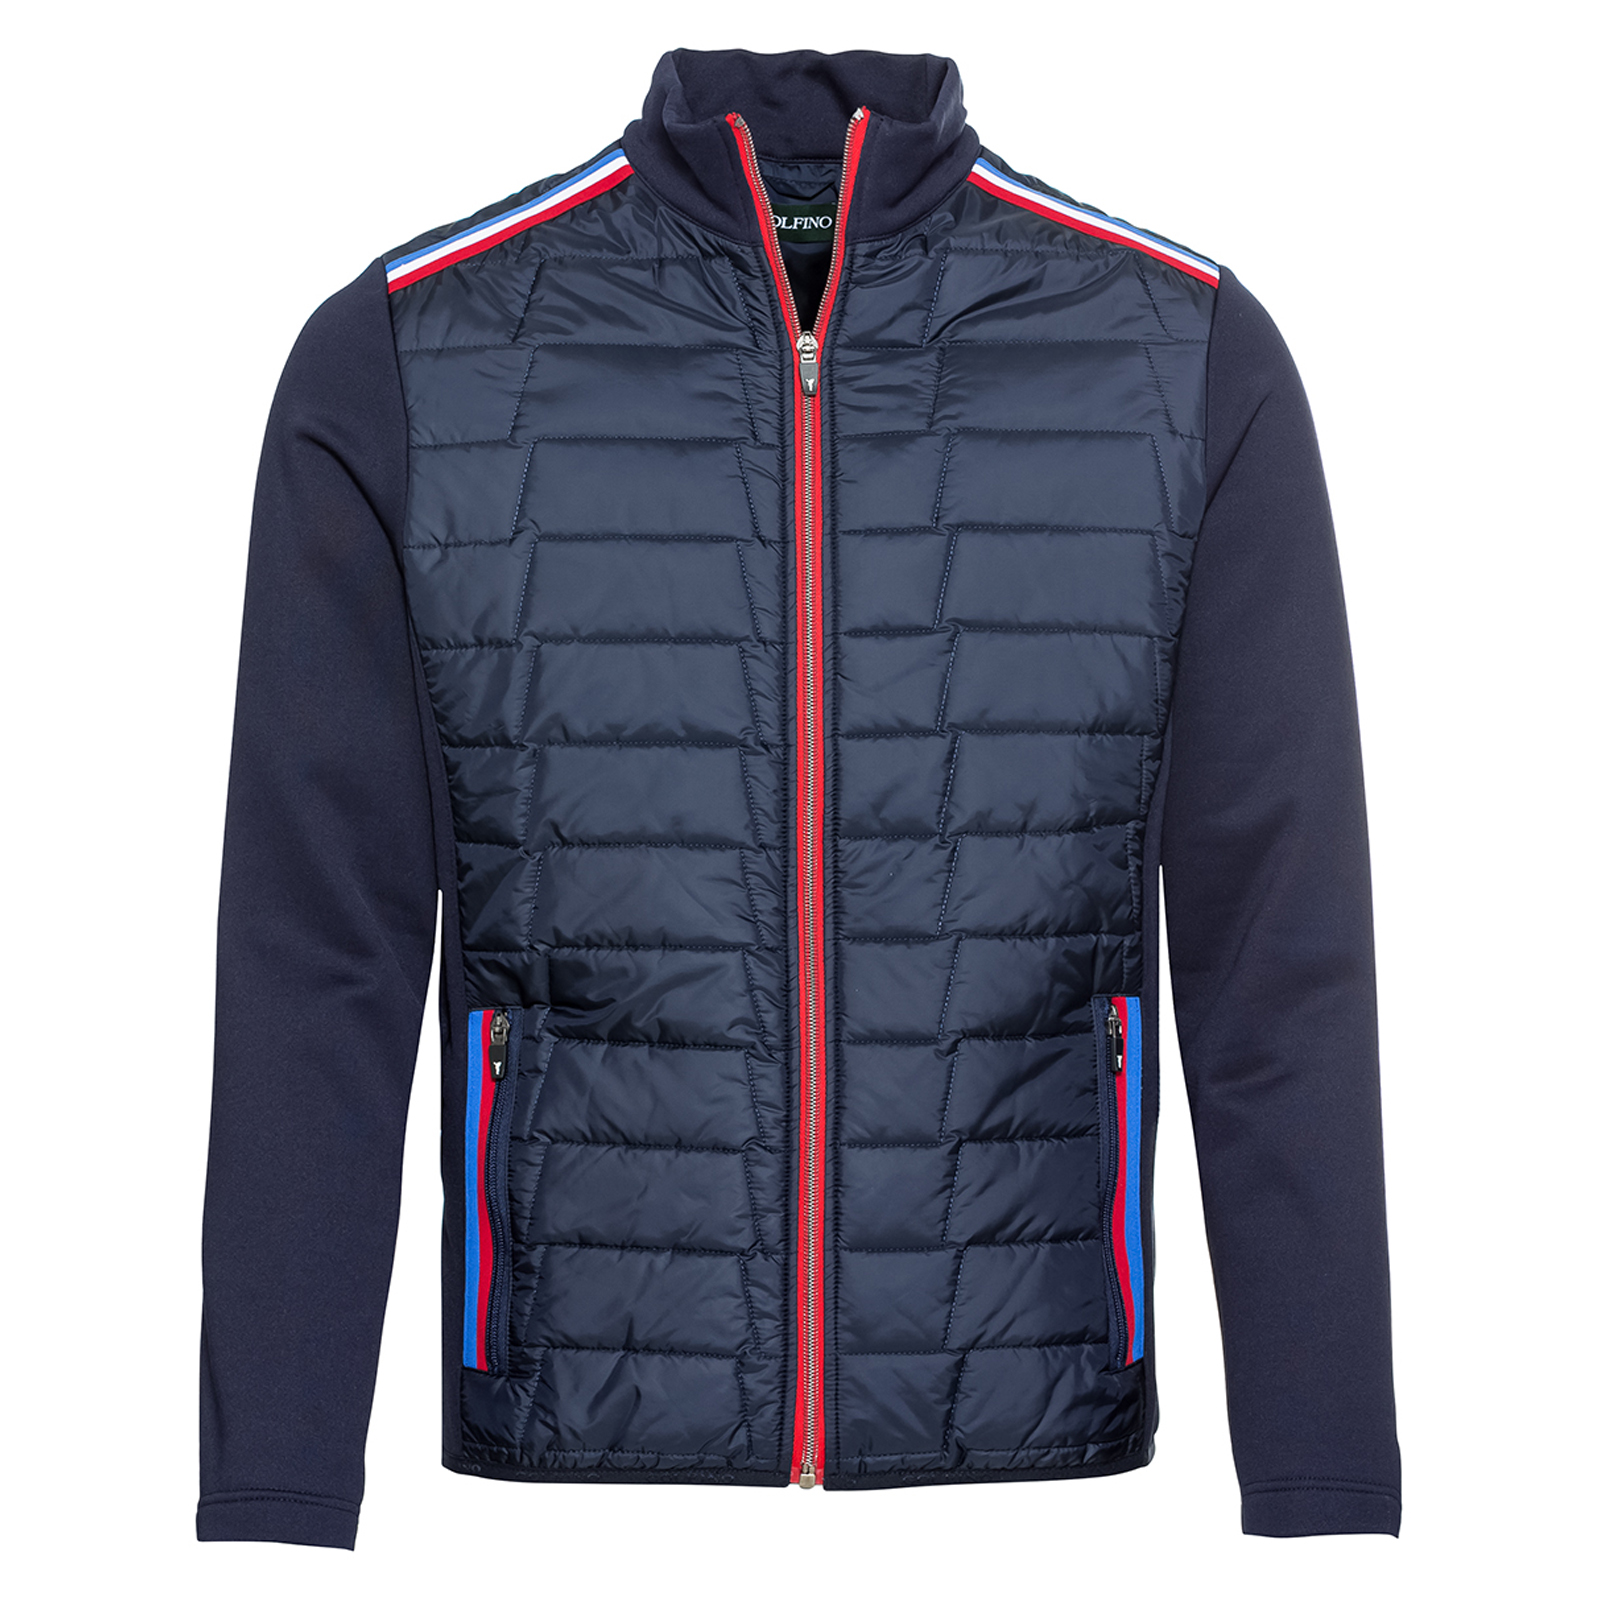 Men's stretch golf jacket with contrasting stripes and cold weather protection 